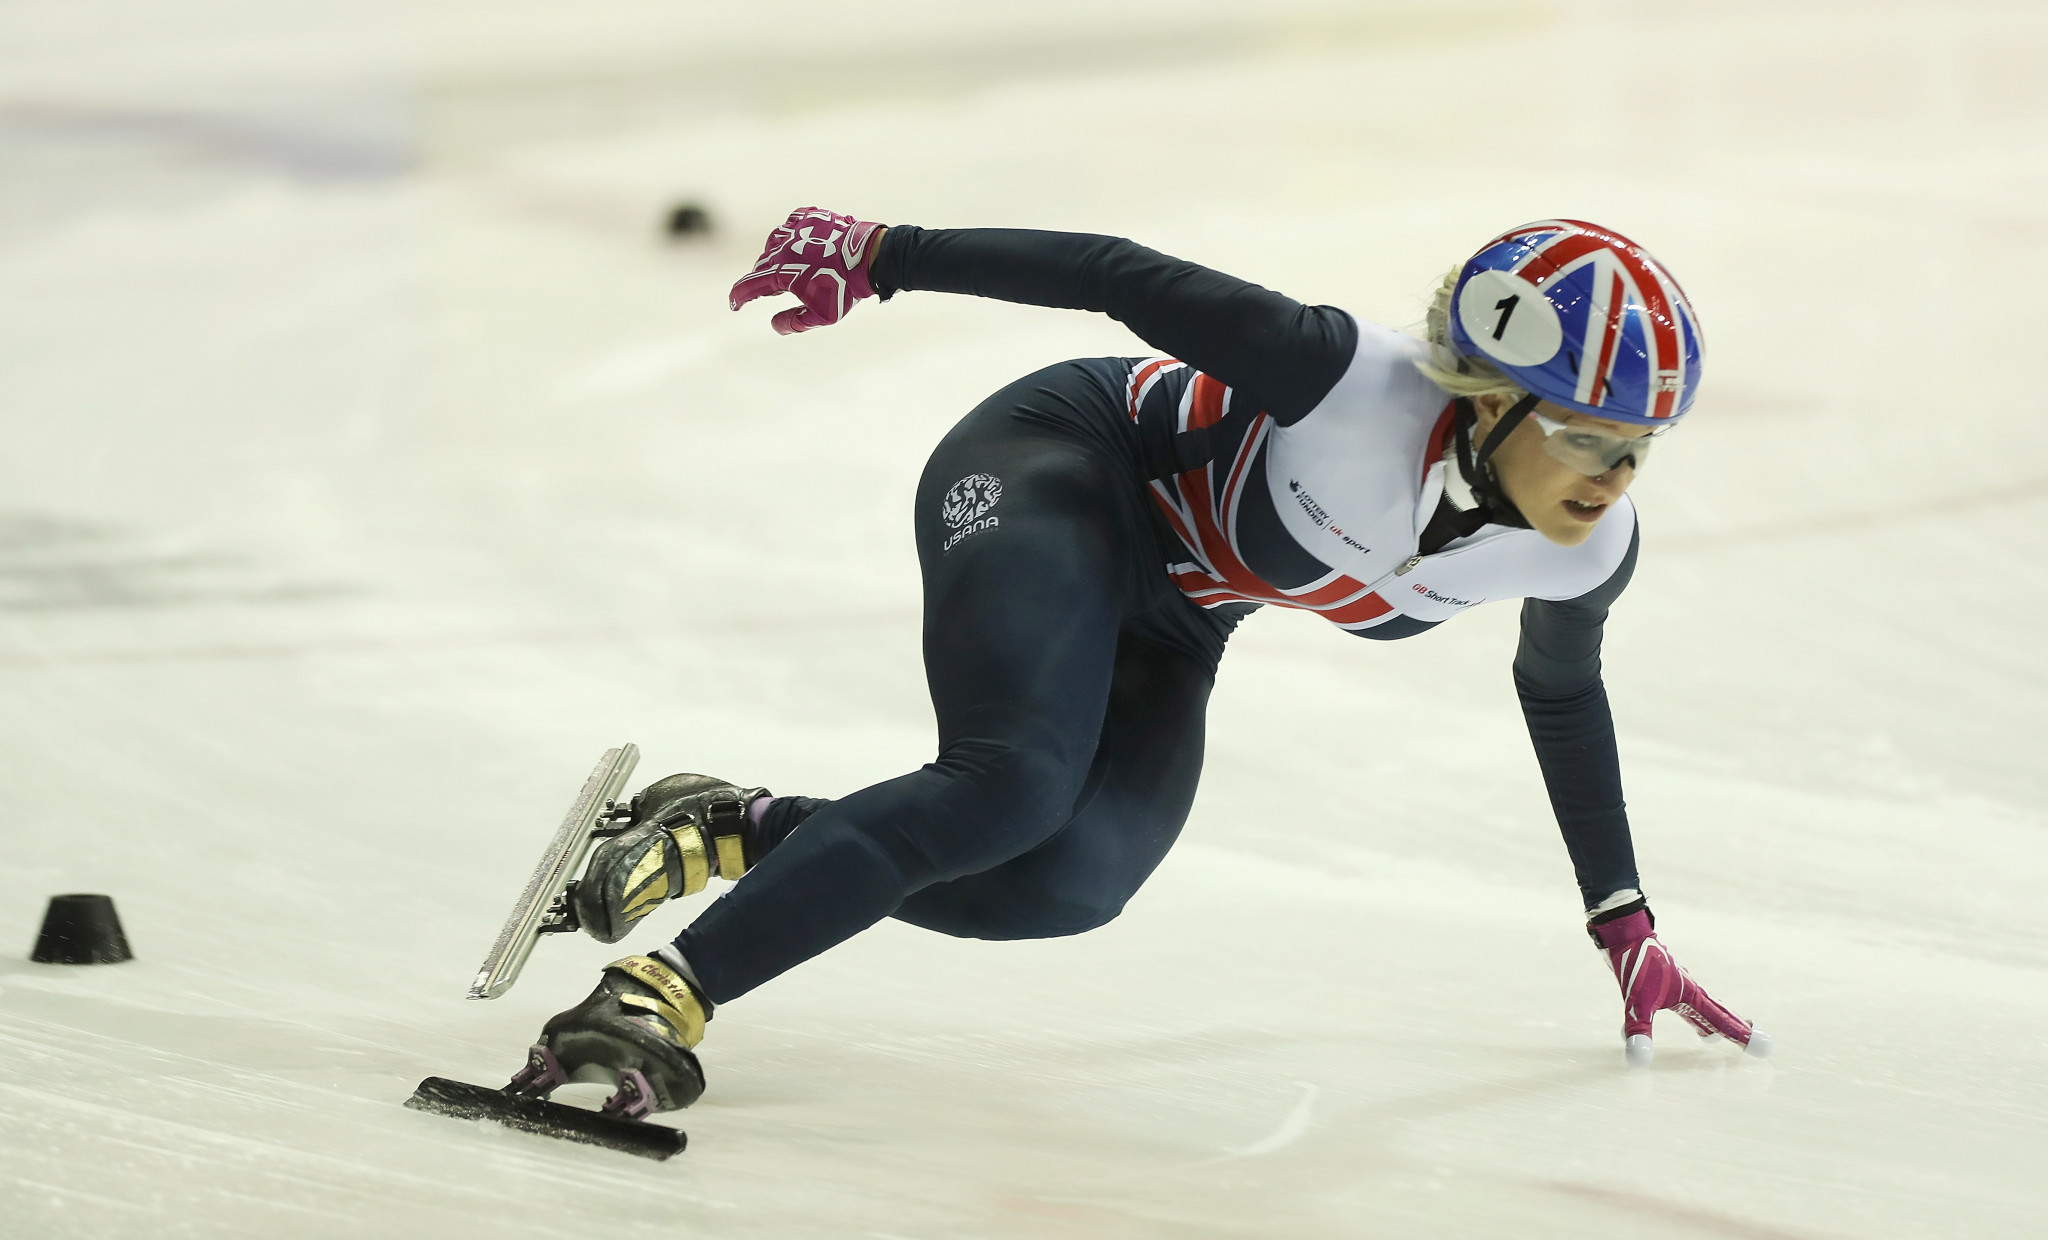 Elise Christie is looking towards Milan Cortina 2026, months after announcing her retirement ©Getty Images